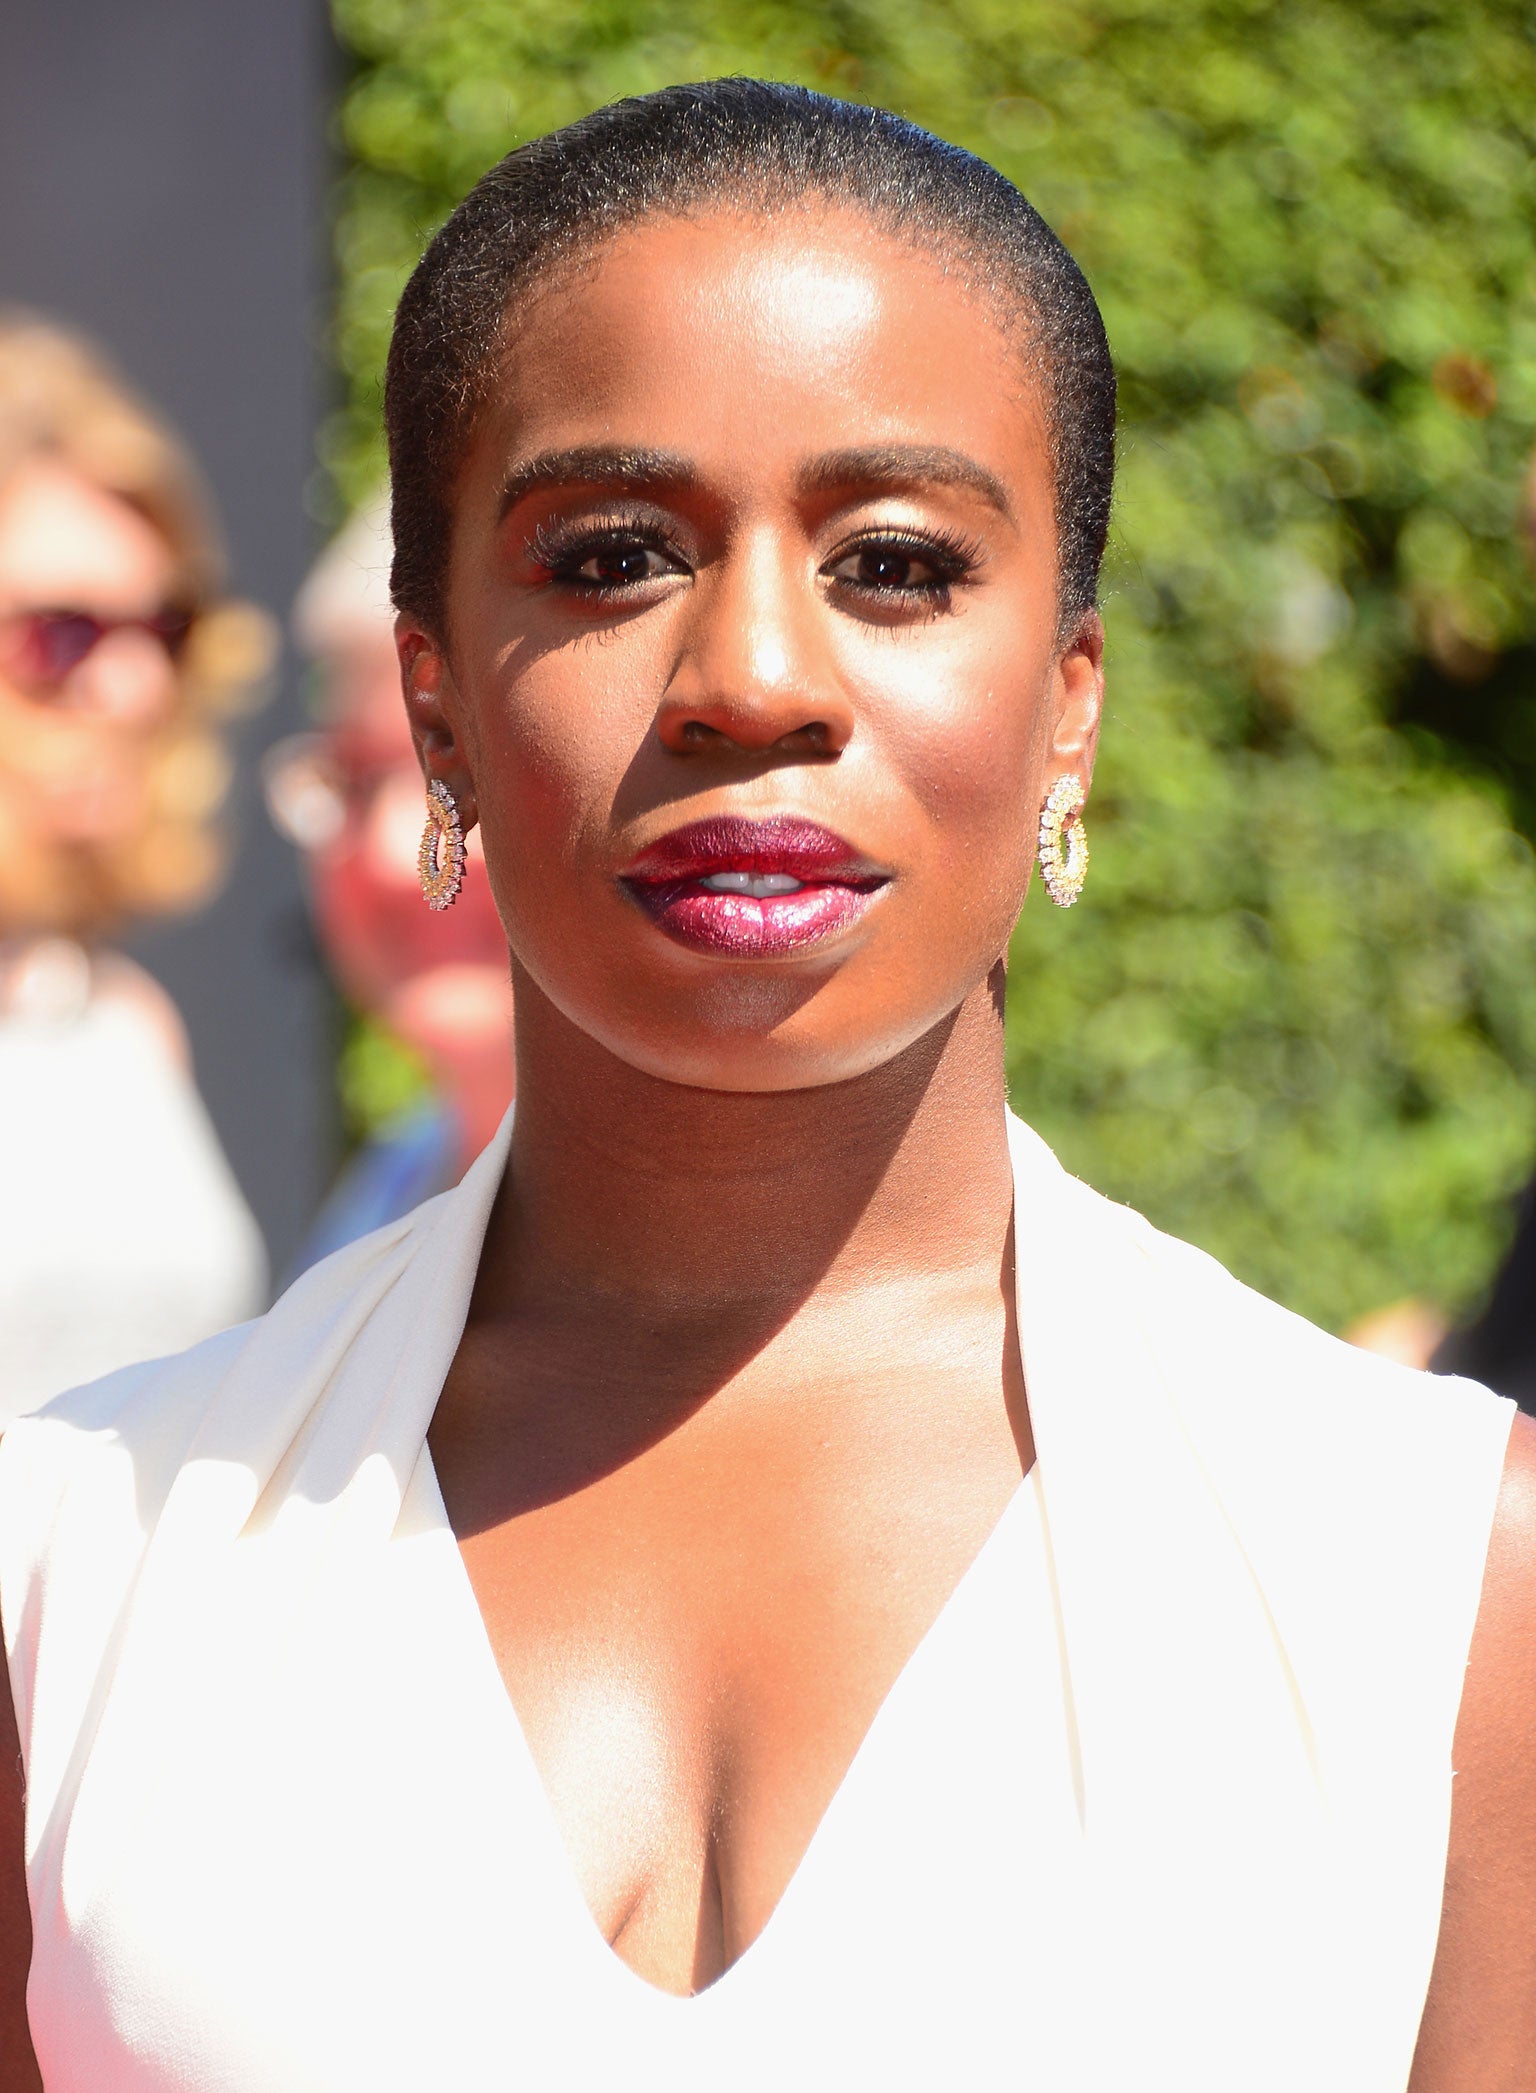 Uzo Aduba on the red carpet at the Creative Arts Emmy Awards in L.A.